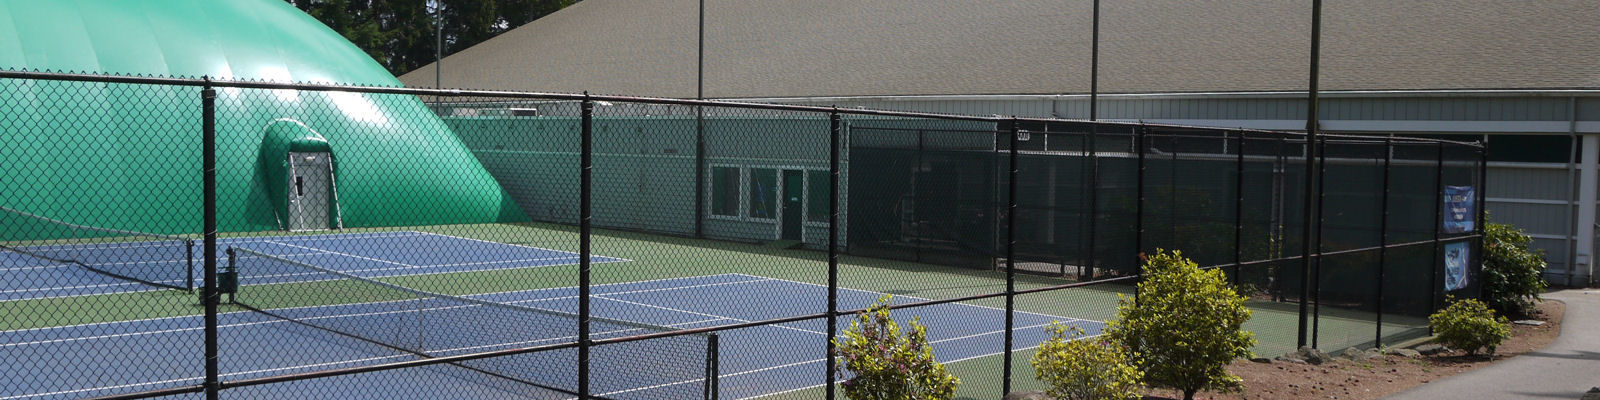 Robinswood Tennis Center - outside